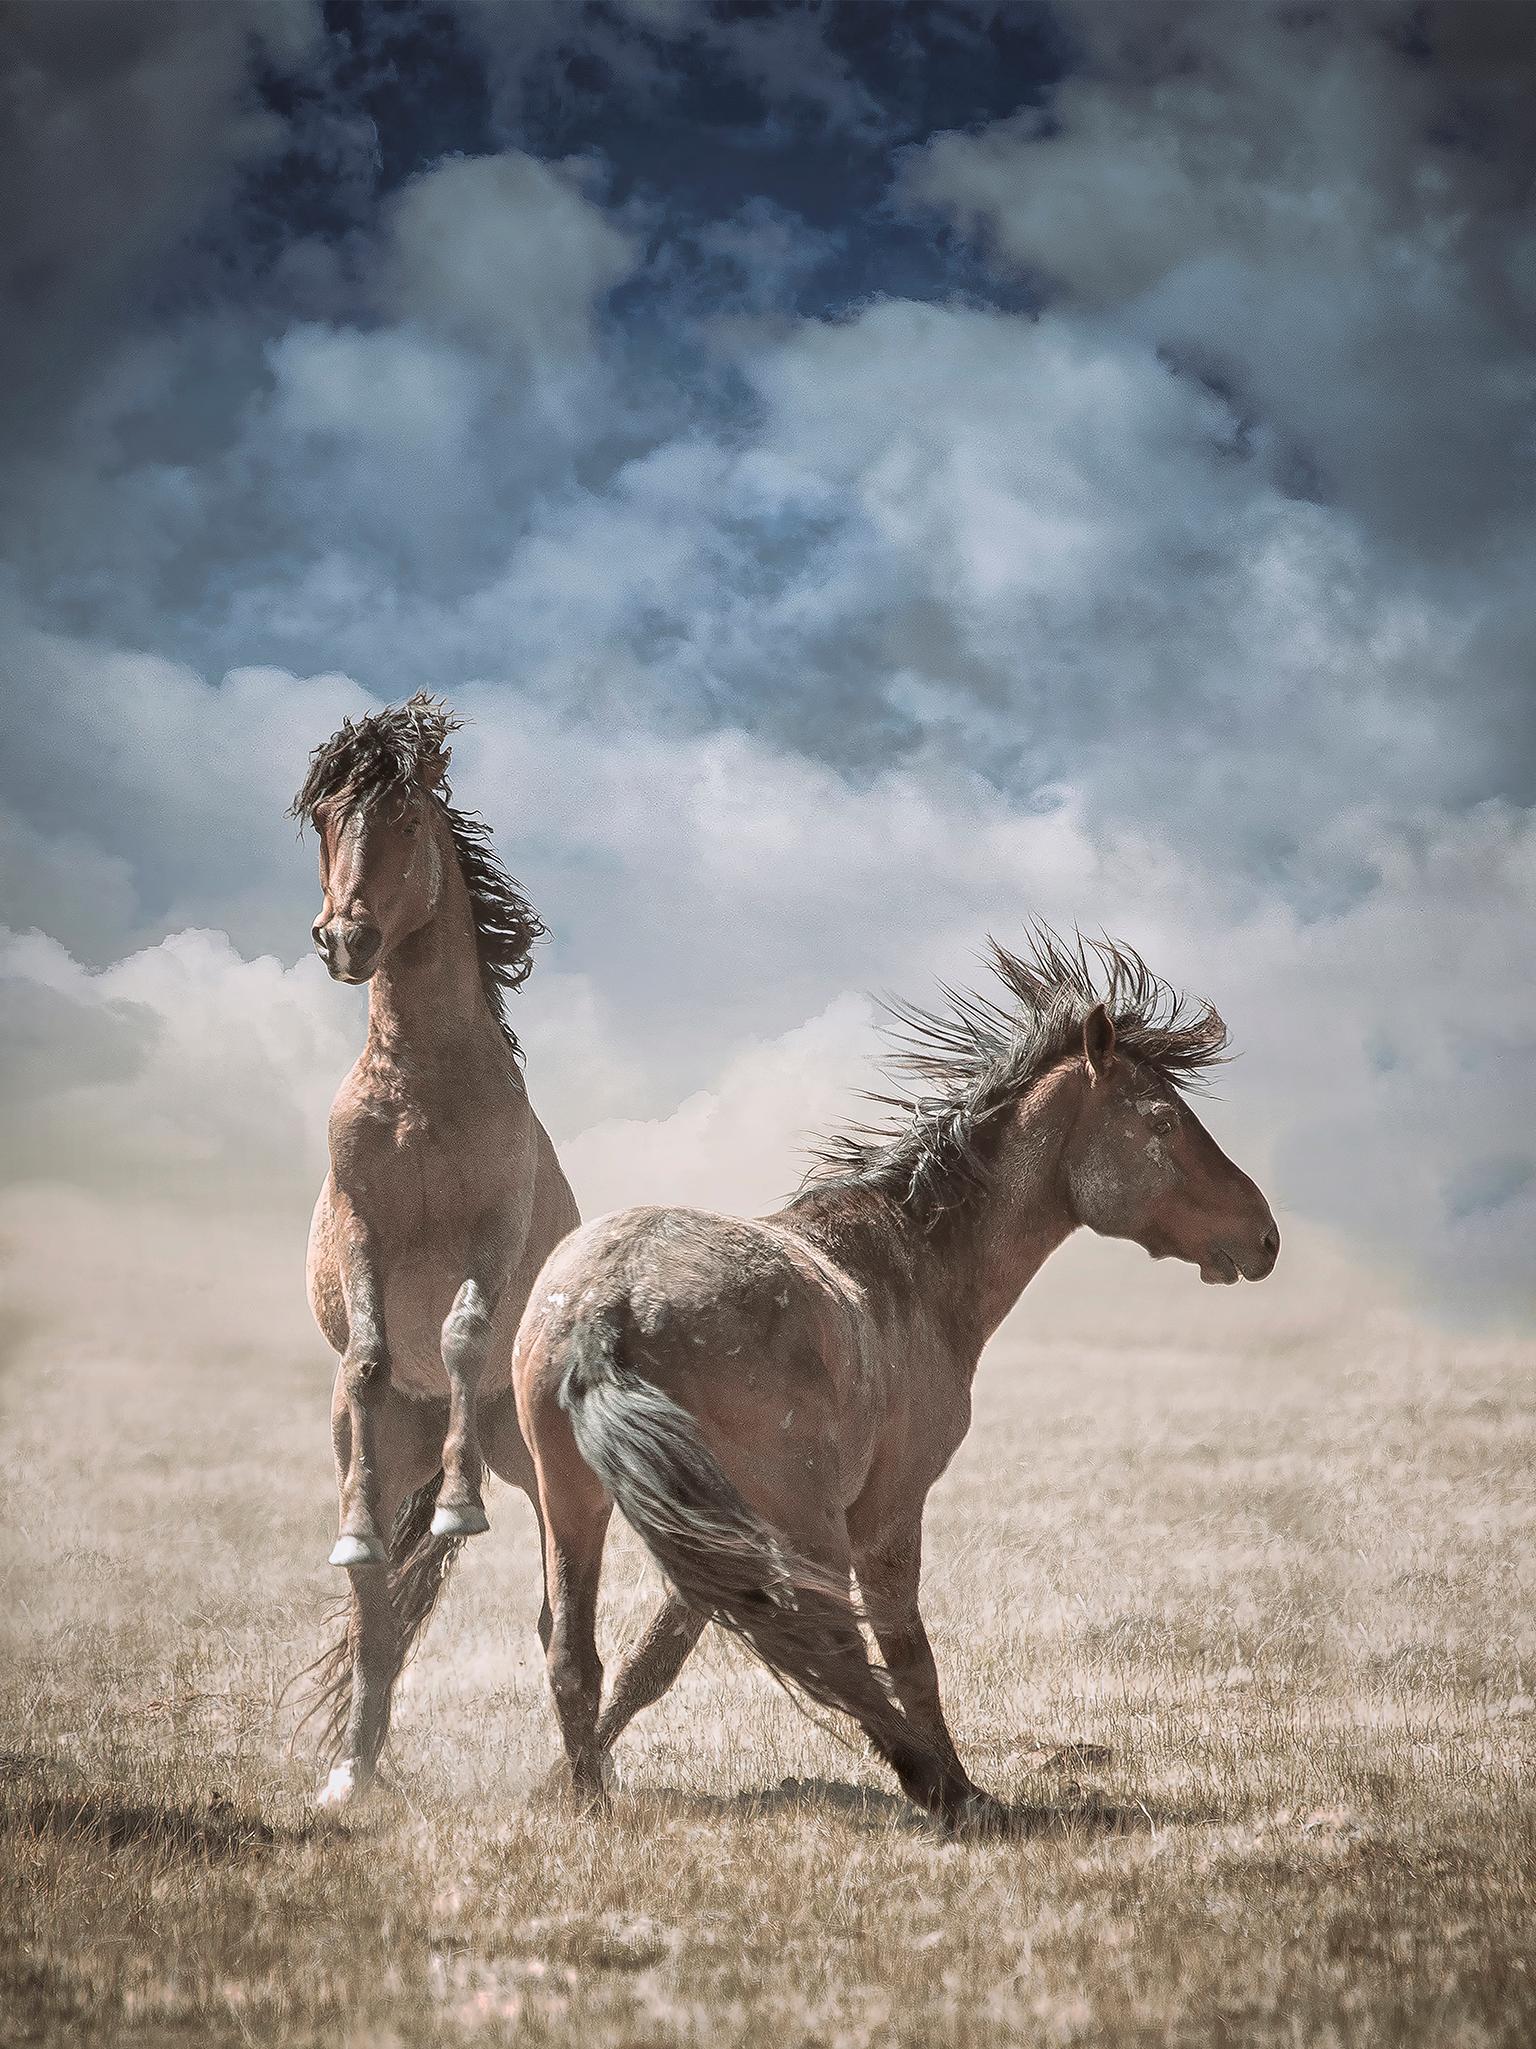 "Wonder Horses"  32 x 40  - Wild Horses - Wild Mustang Photography - Art by Shane Russeck